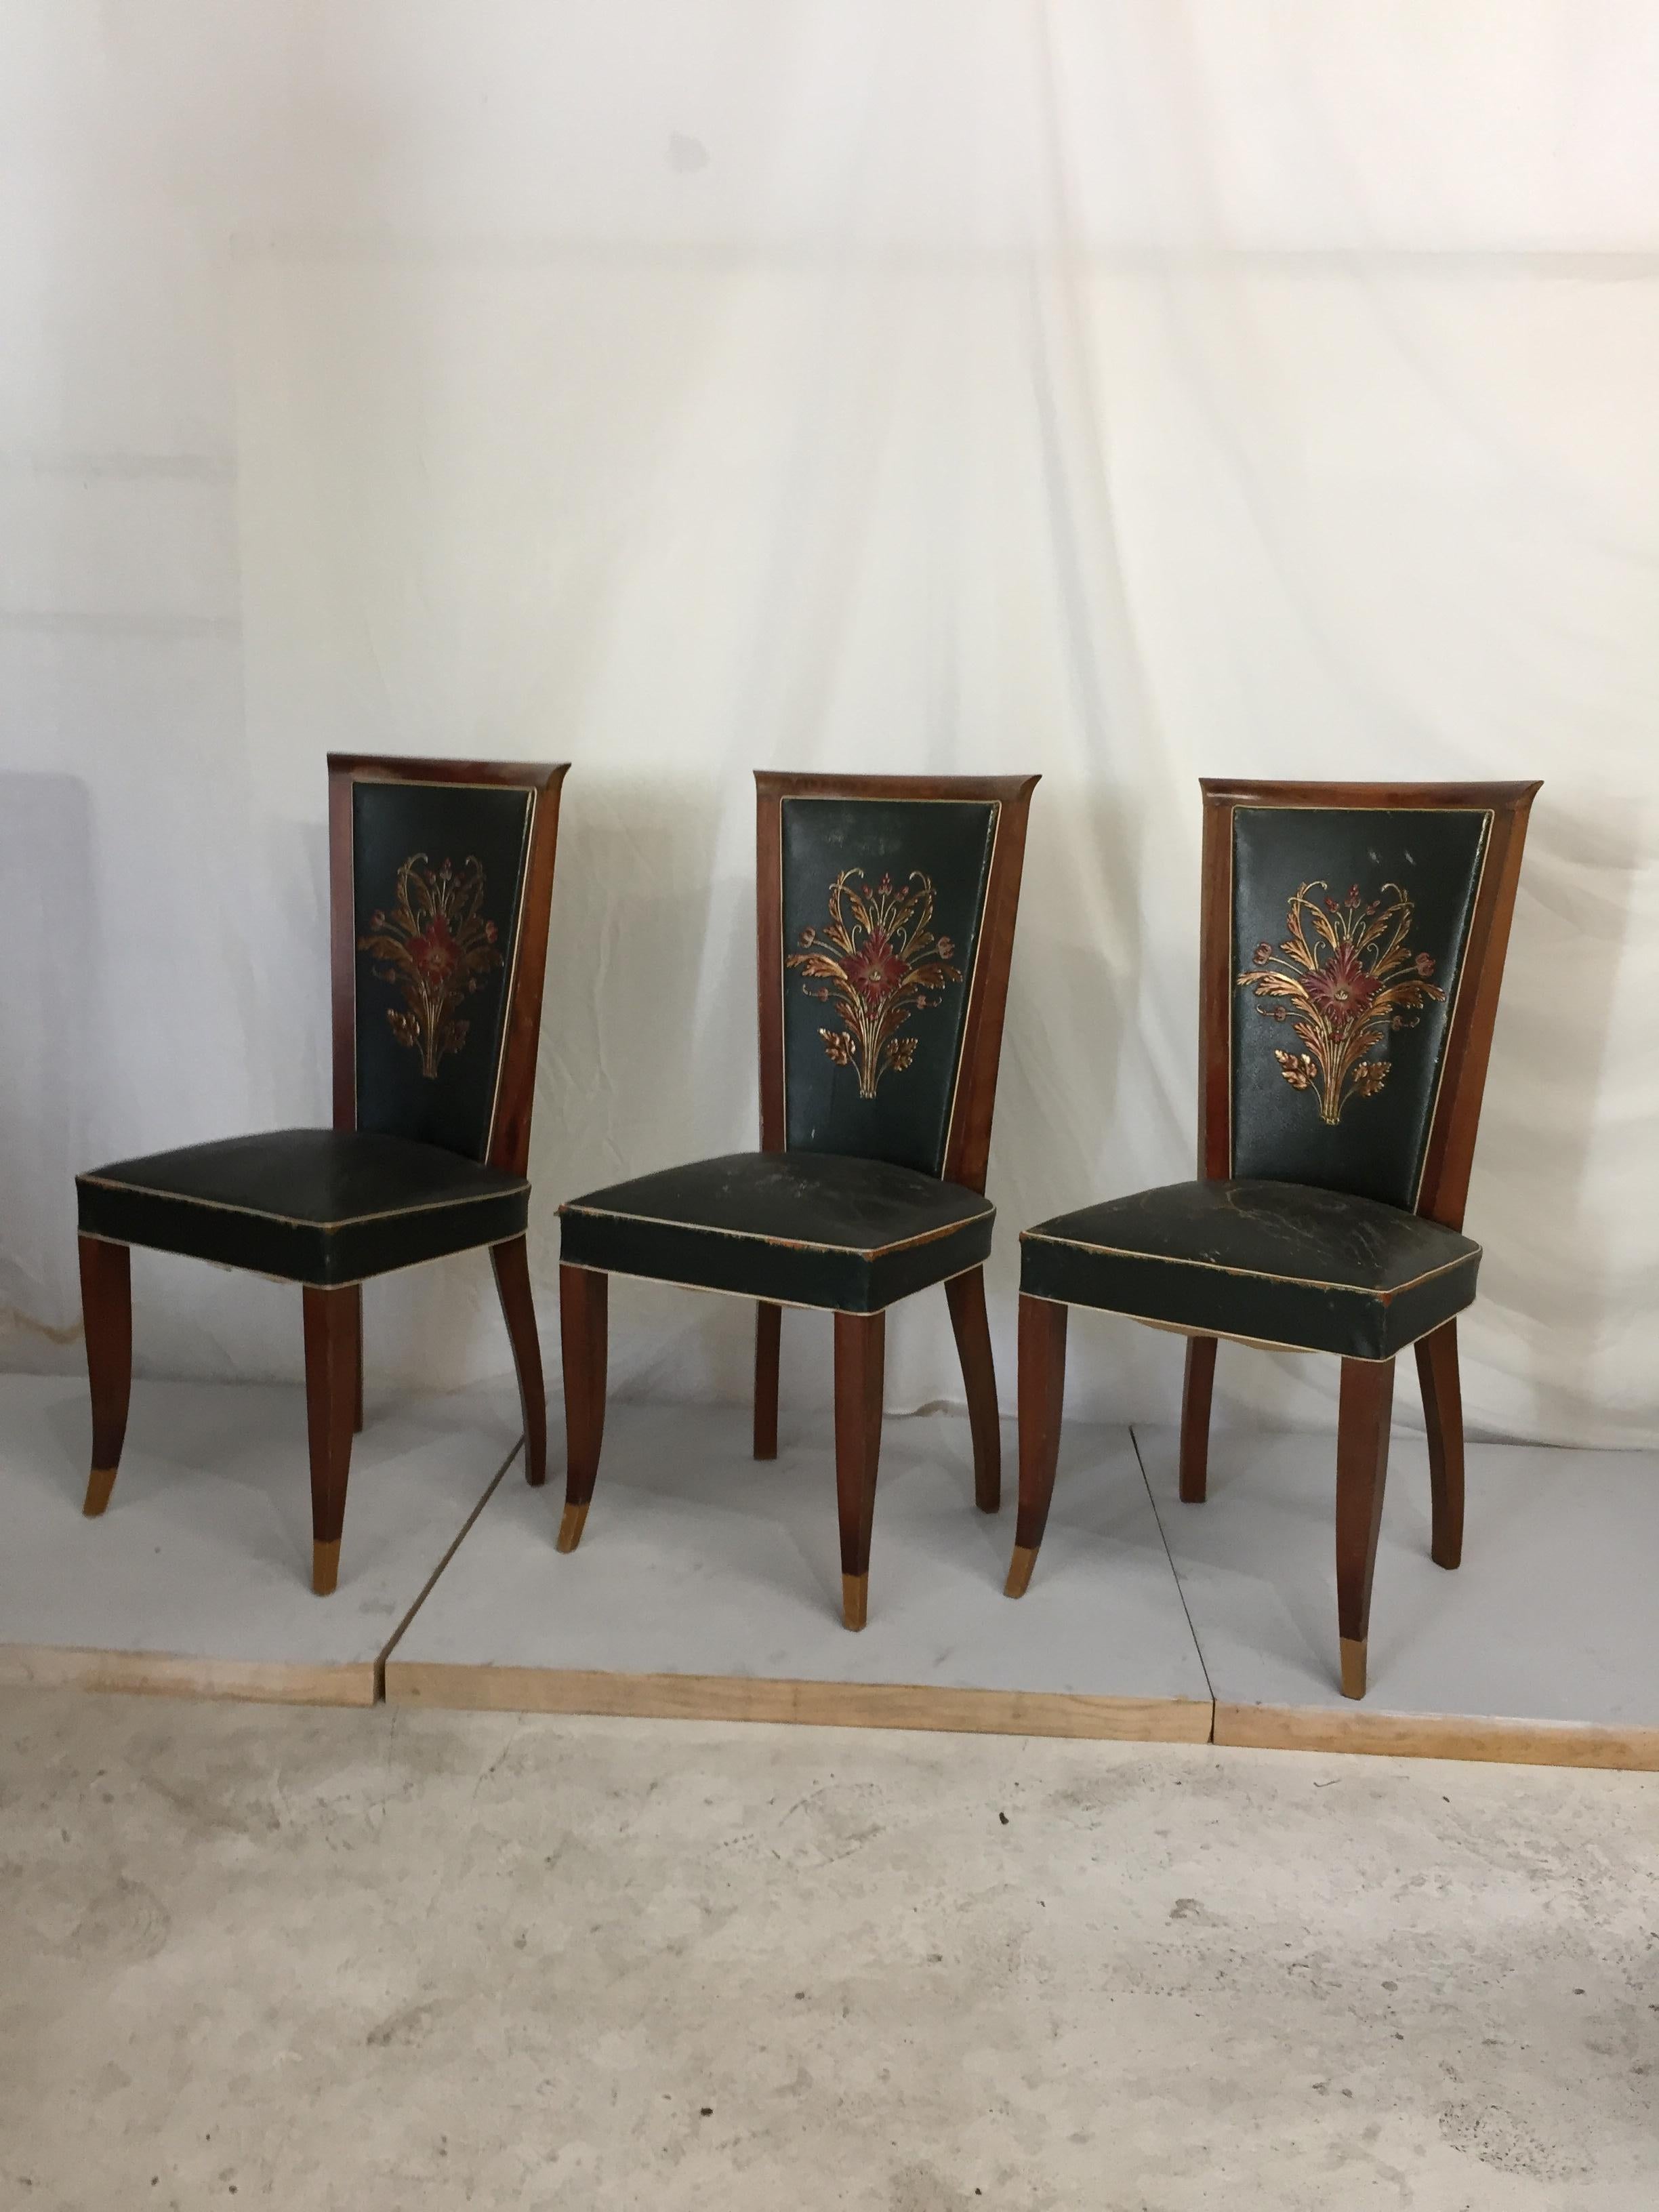 Original condition for these set of six chairs in green leather.
the seat part are in bad condition, must be reupholstered.
Backs of the chairs are in good condition from origine.
Tight frame in beech to refinish, not structural issues, elegant